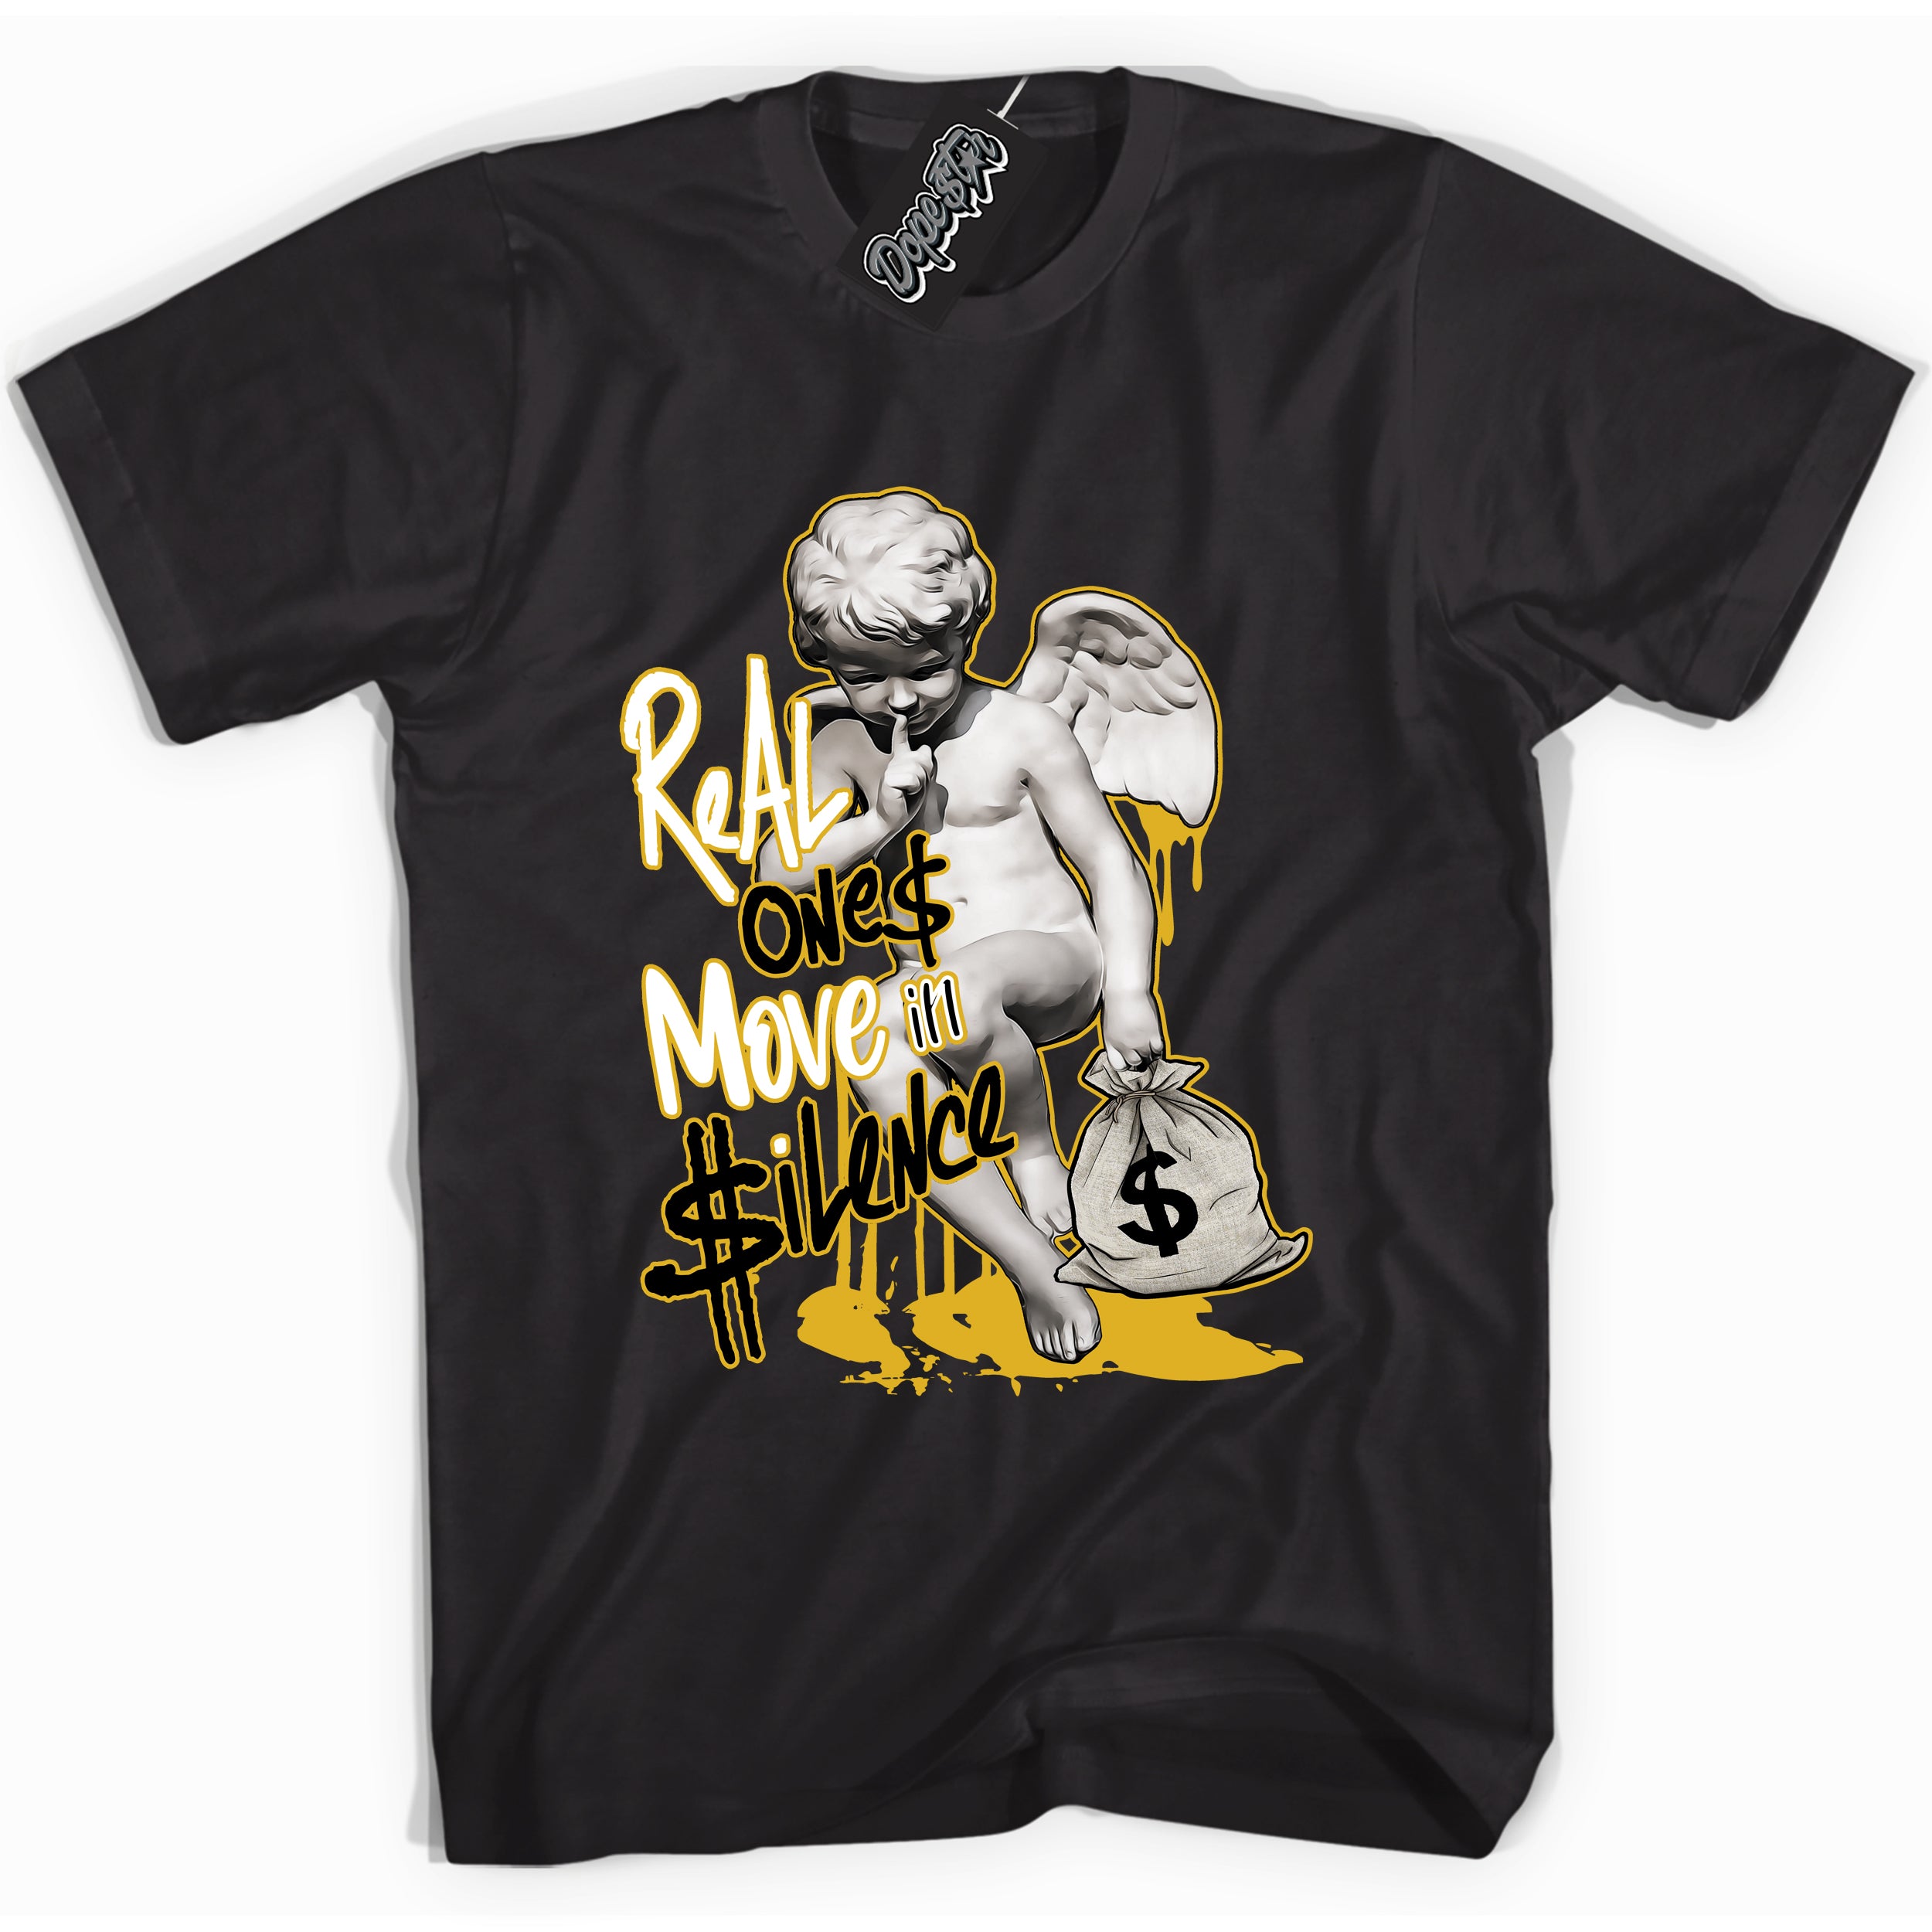 Cool Black Shirt with “ Real Ones Cherub ” design that perfectly matches Yellow Ochre 6s Sneakers.